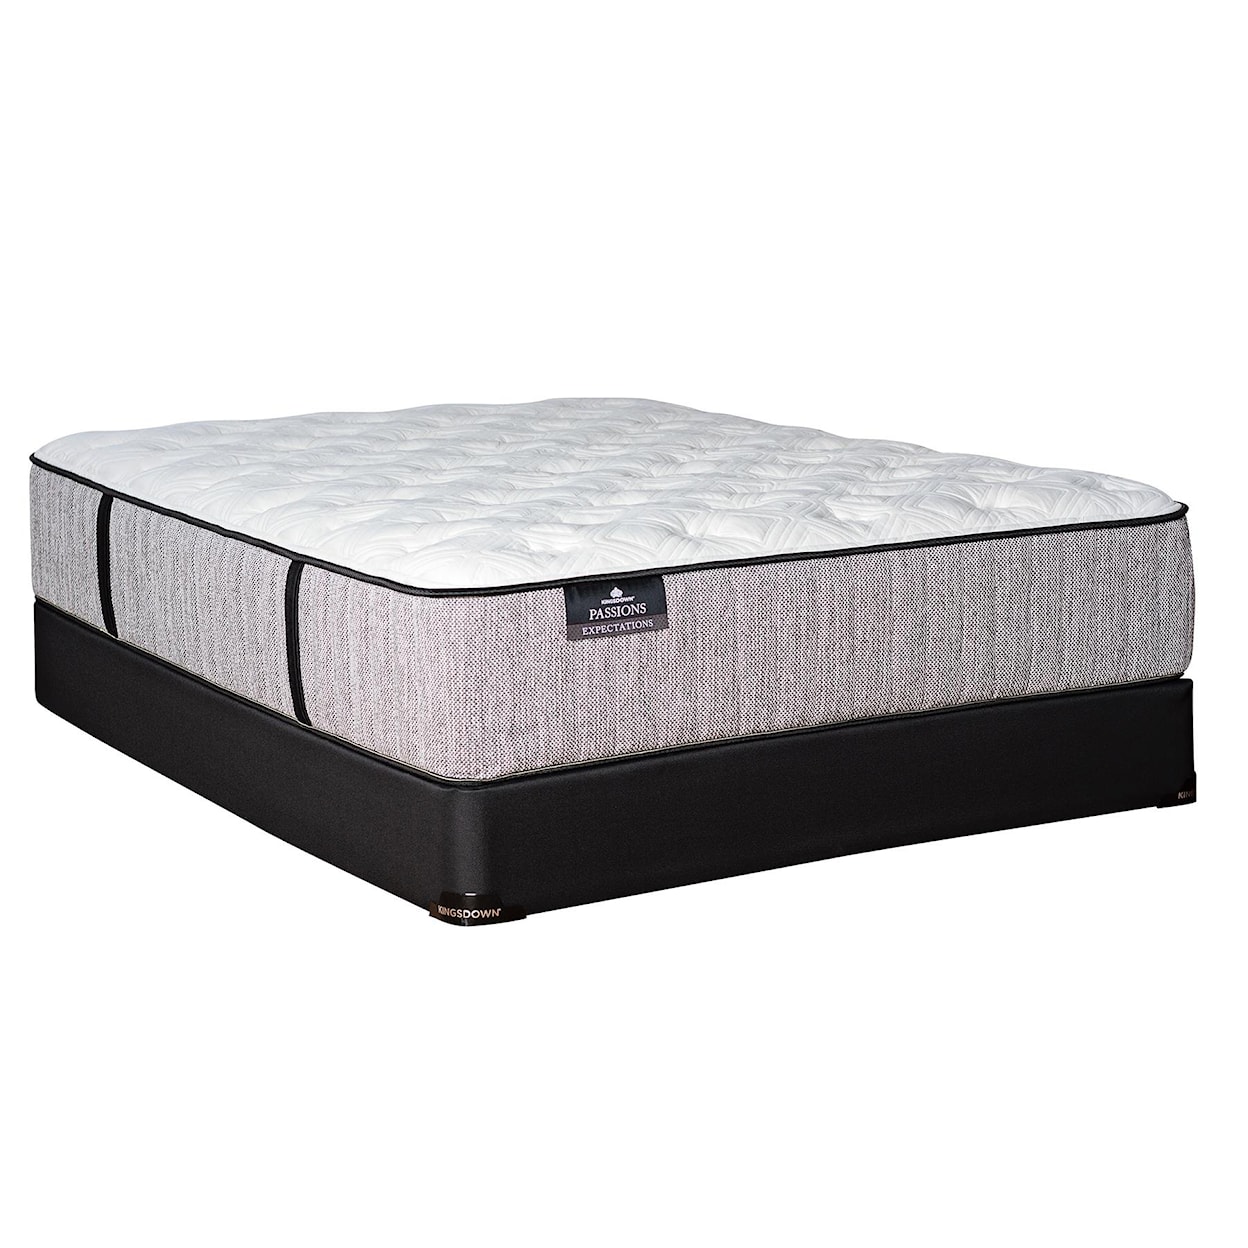 Kingsdown Passions Expectations King Plush Mattress with Gel Memory Foam